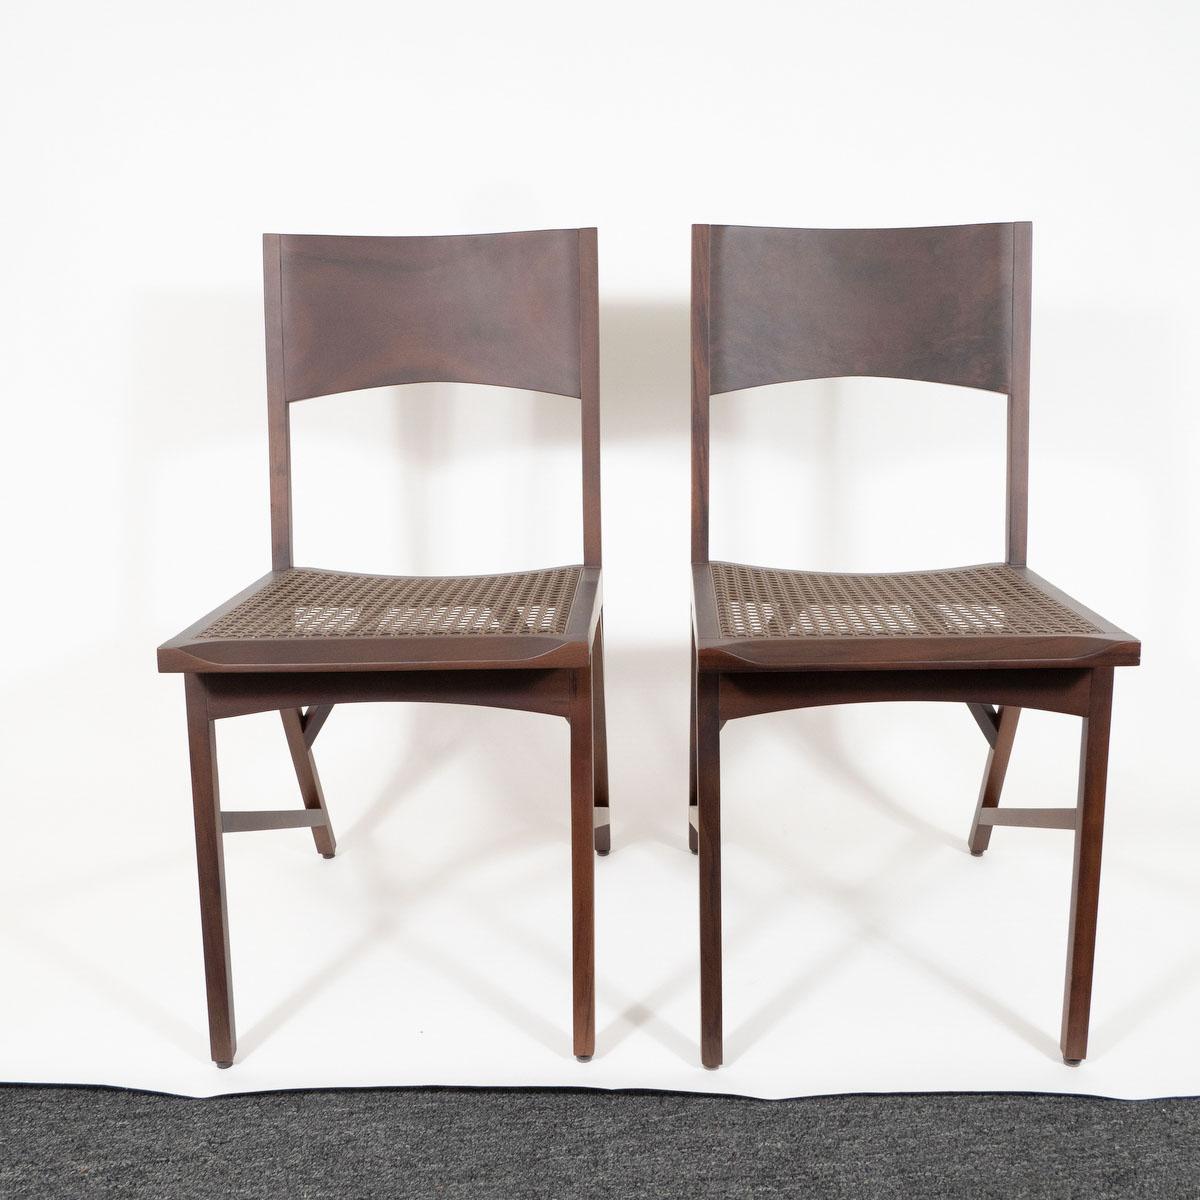 Pair of Limited Edition Wood Chairs by Paolo Alves In New Condition For Sale In Tarrytown, NY